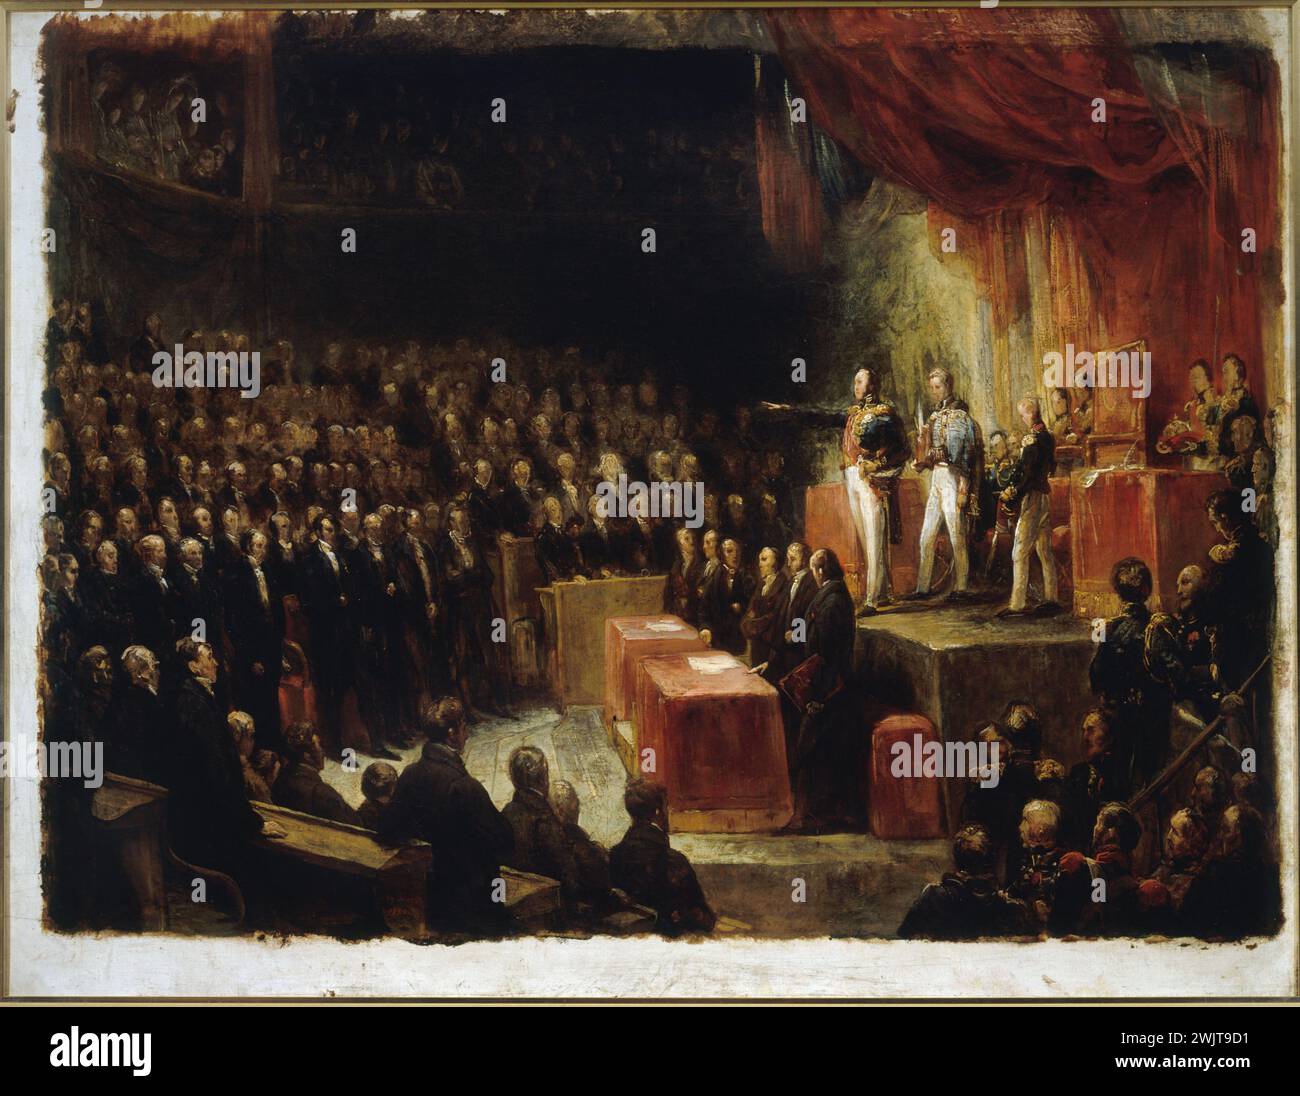 Ary Scheffer. 'Louis-Philippe I is sworn in front of the rooms, August 9, 1830'. Oil on canvas. Paris, Carnavalet museum. 27042-9 Official ceremony, room, sketch, Louis-Philippe, Parliament, preter oath, oil on canvas Stock Photo